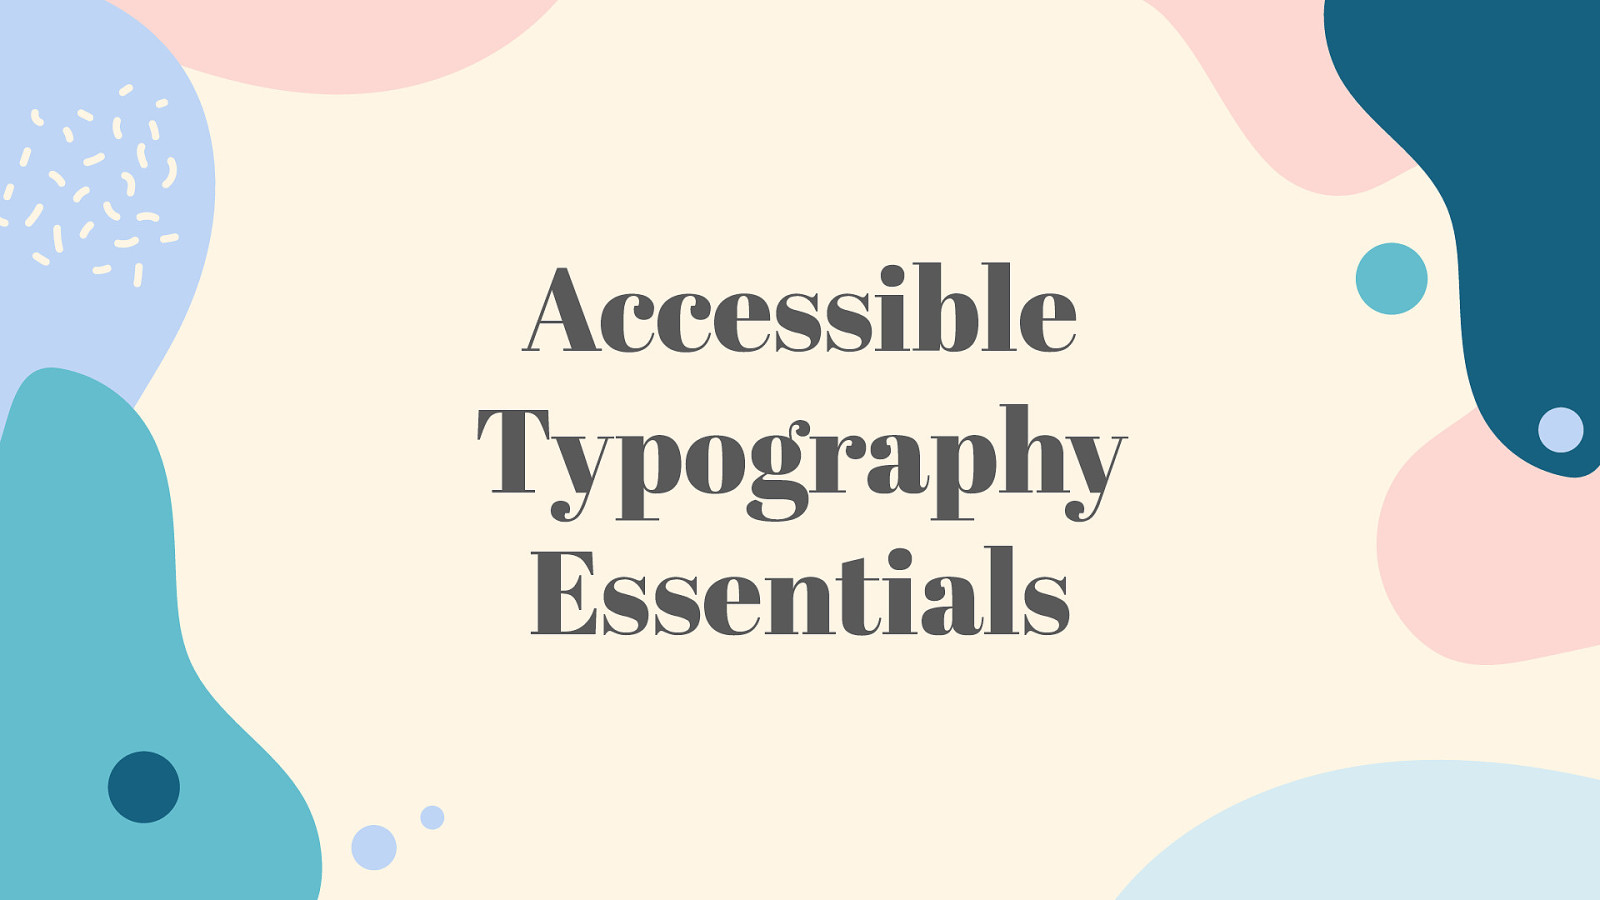 Accessible Typography Essentials